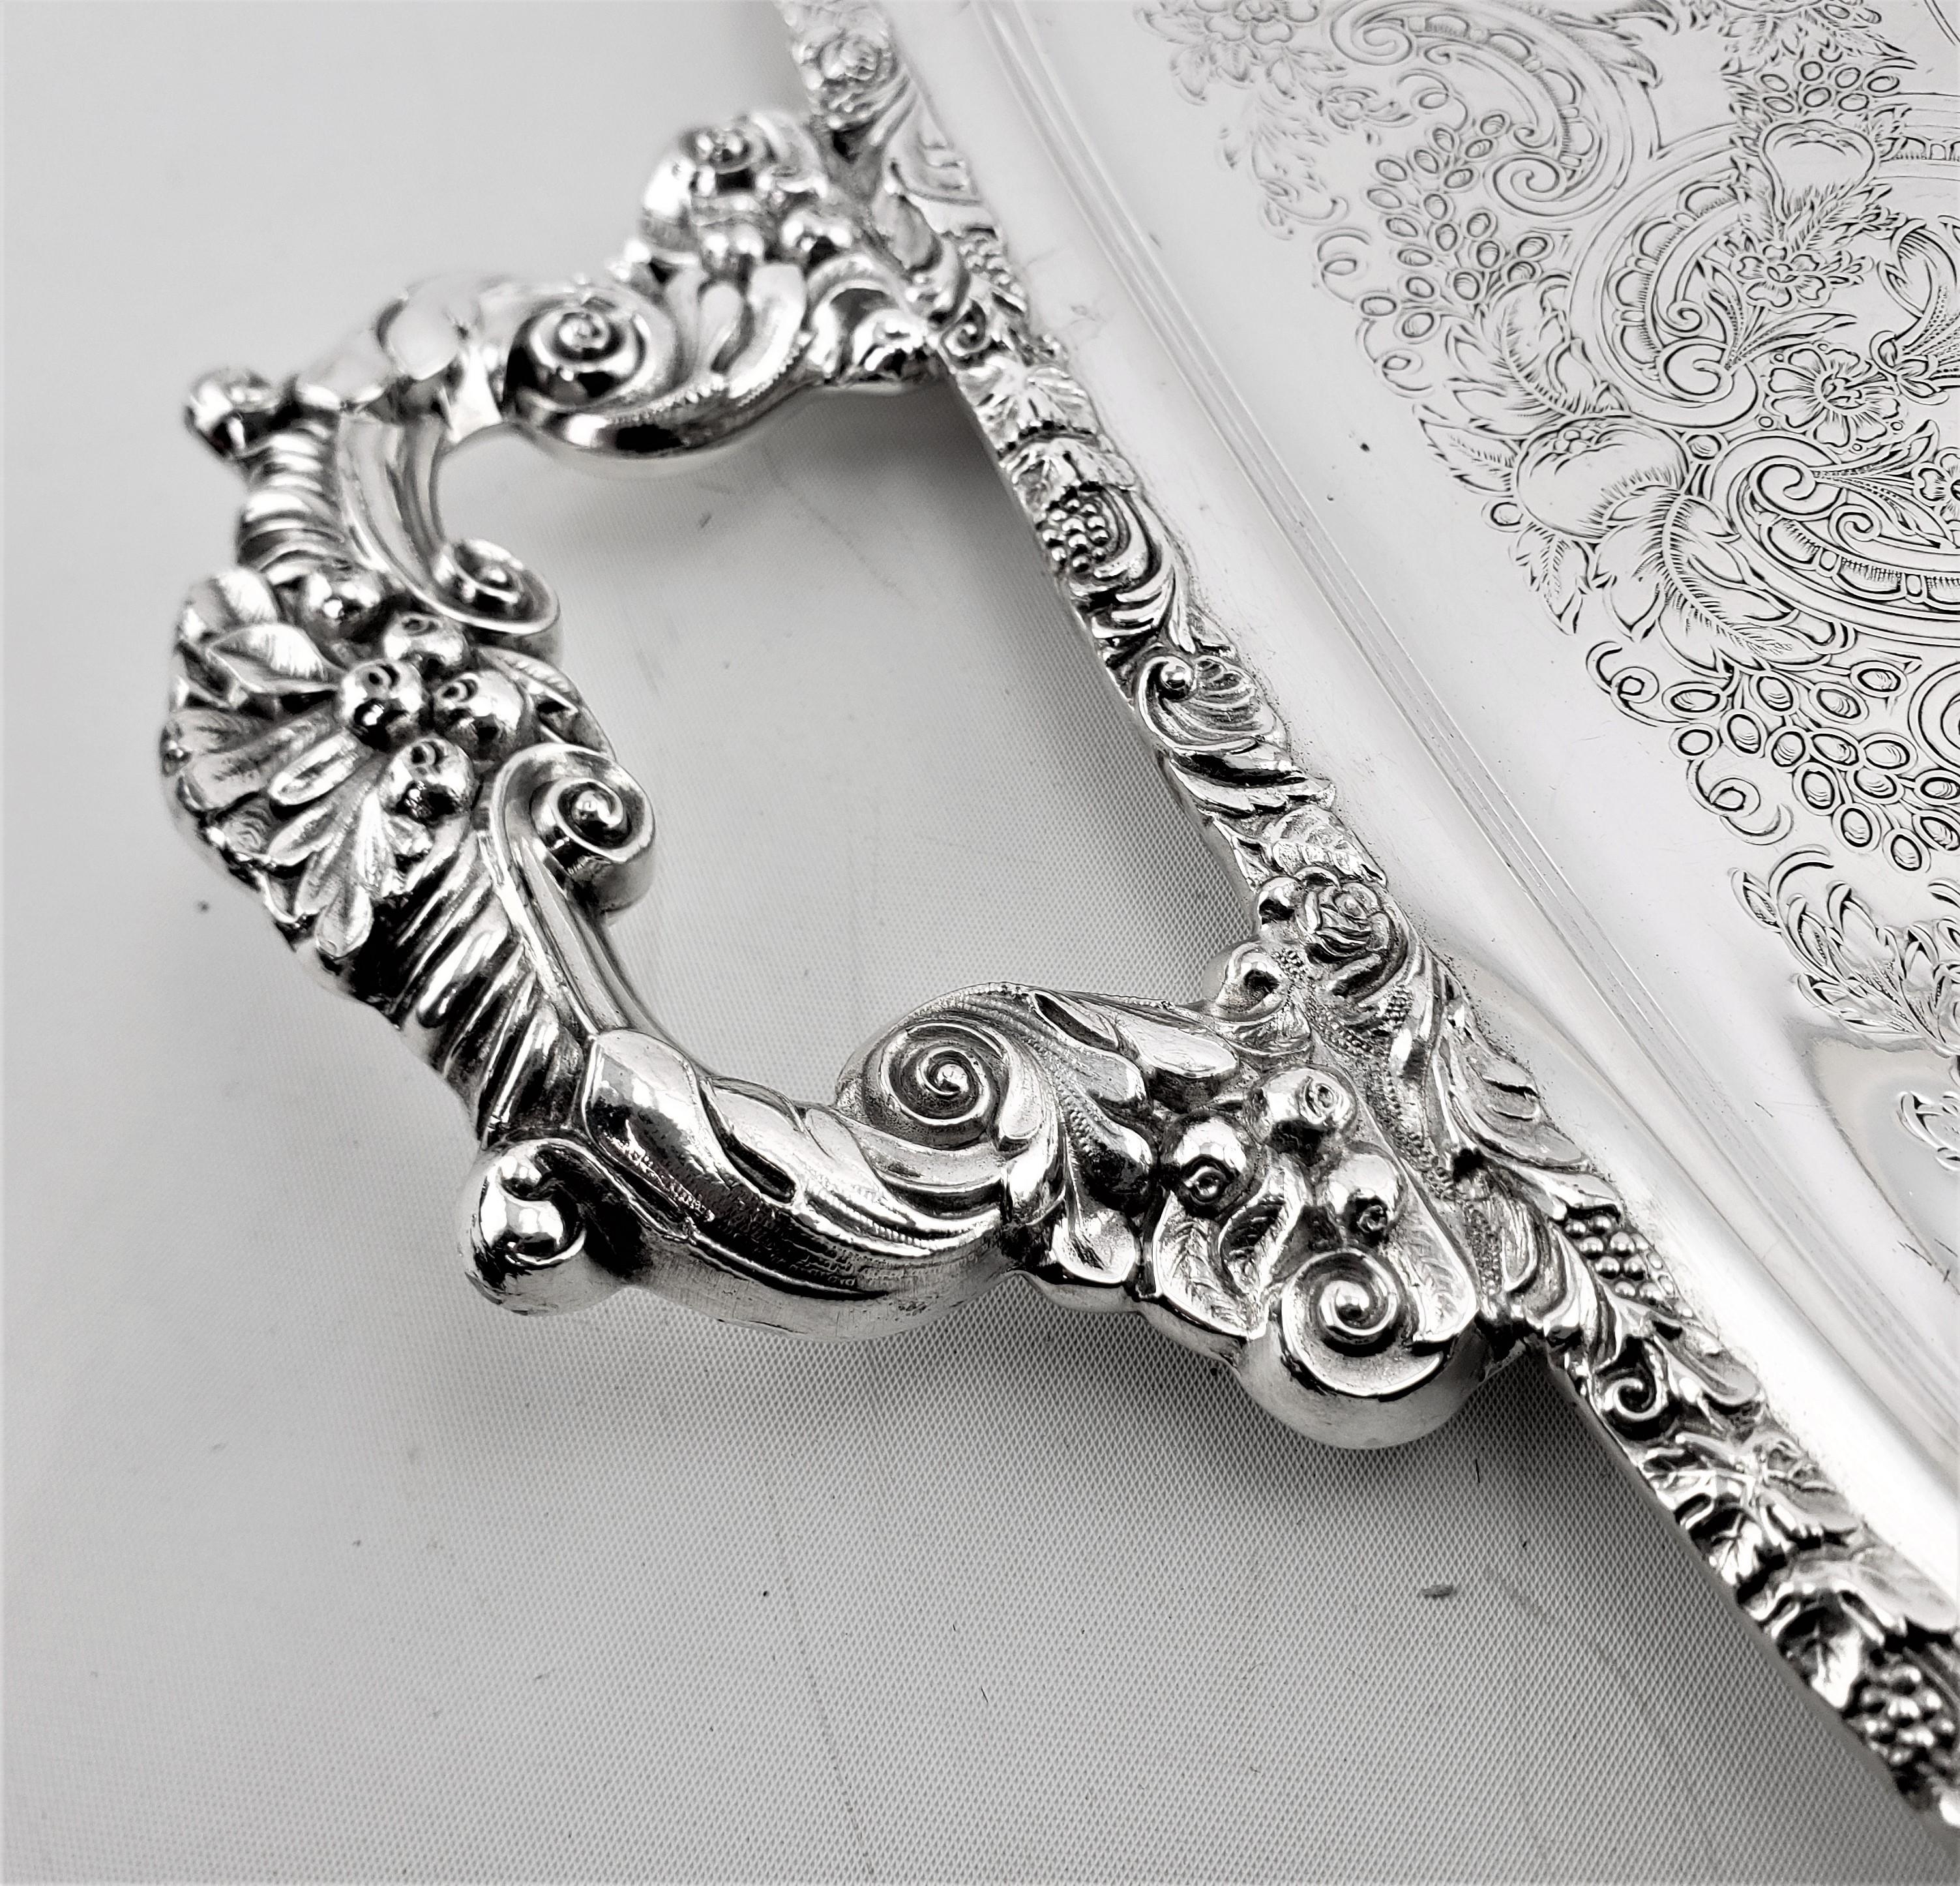 Large Antique English Silver Plated Serving Tray with Ornate Handles & Engraving 3